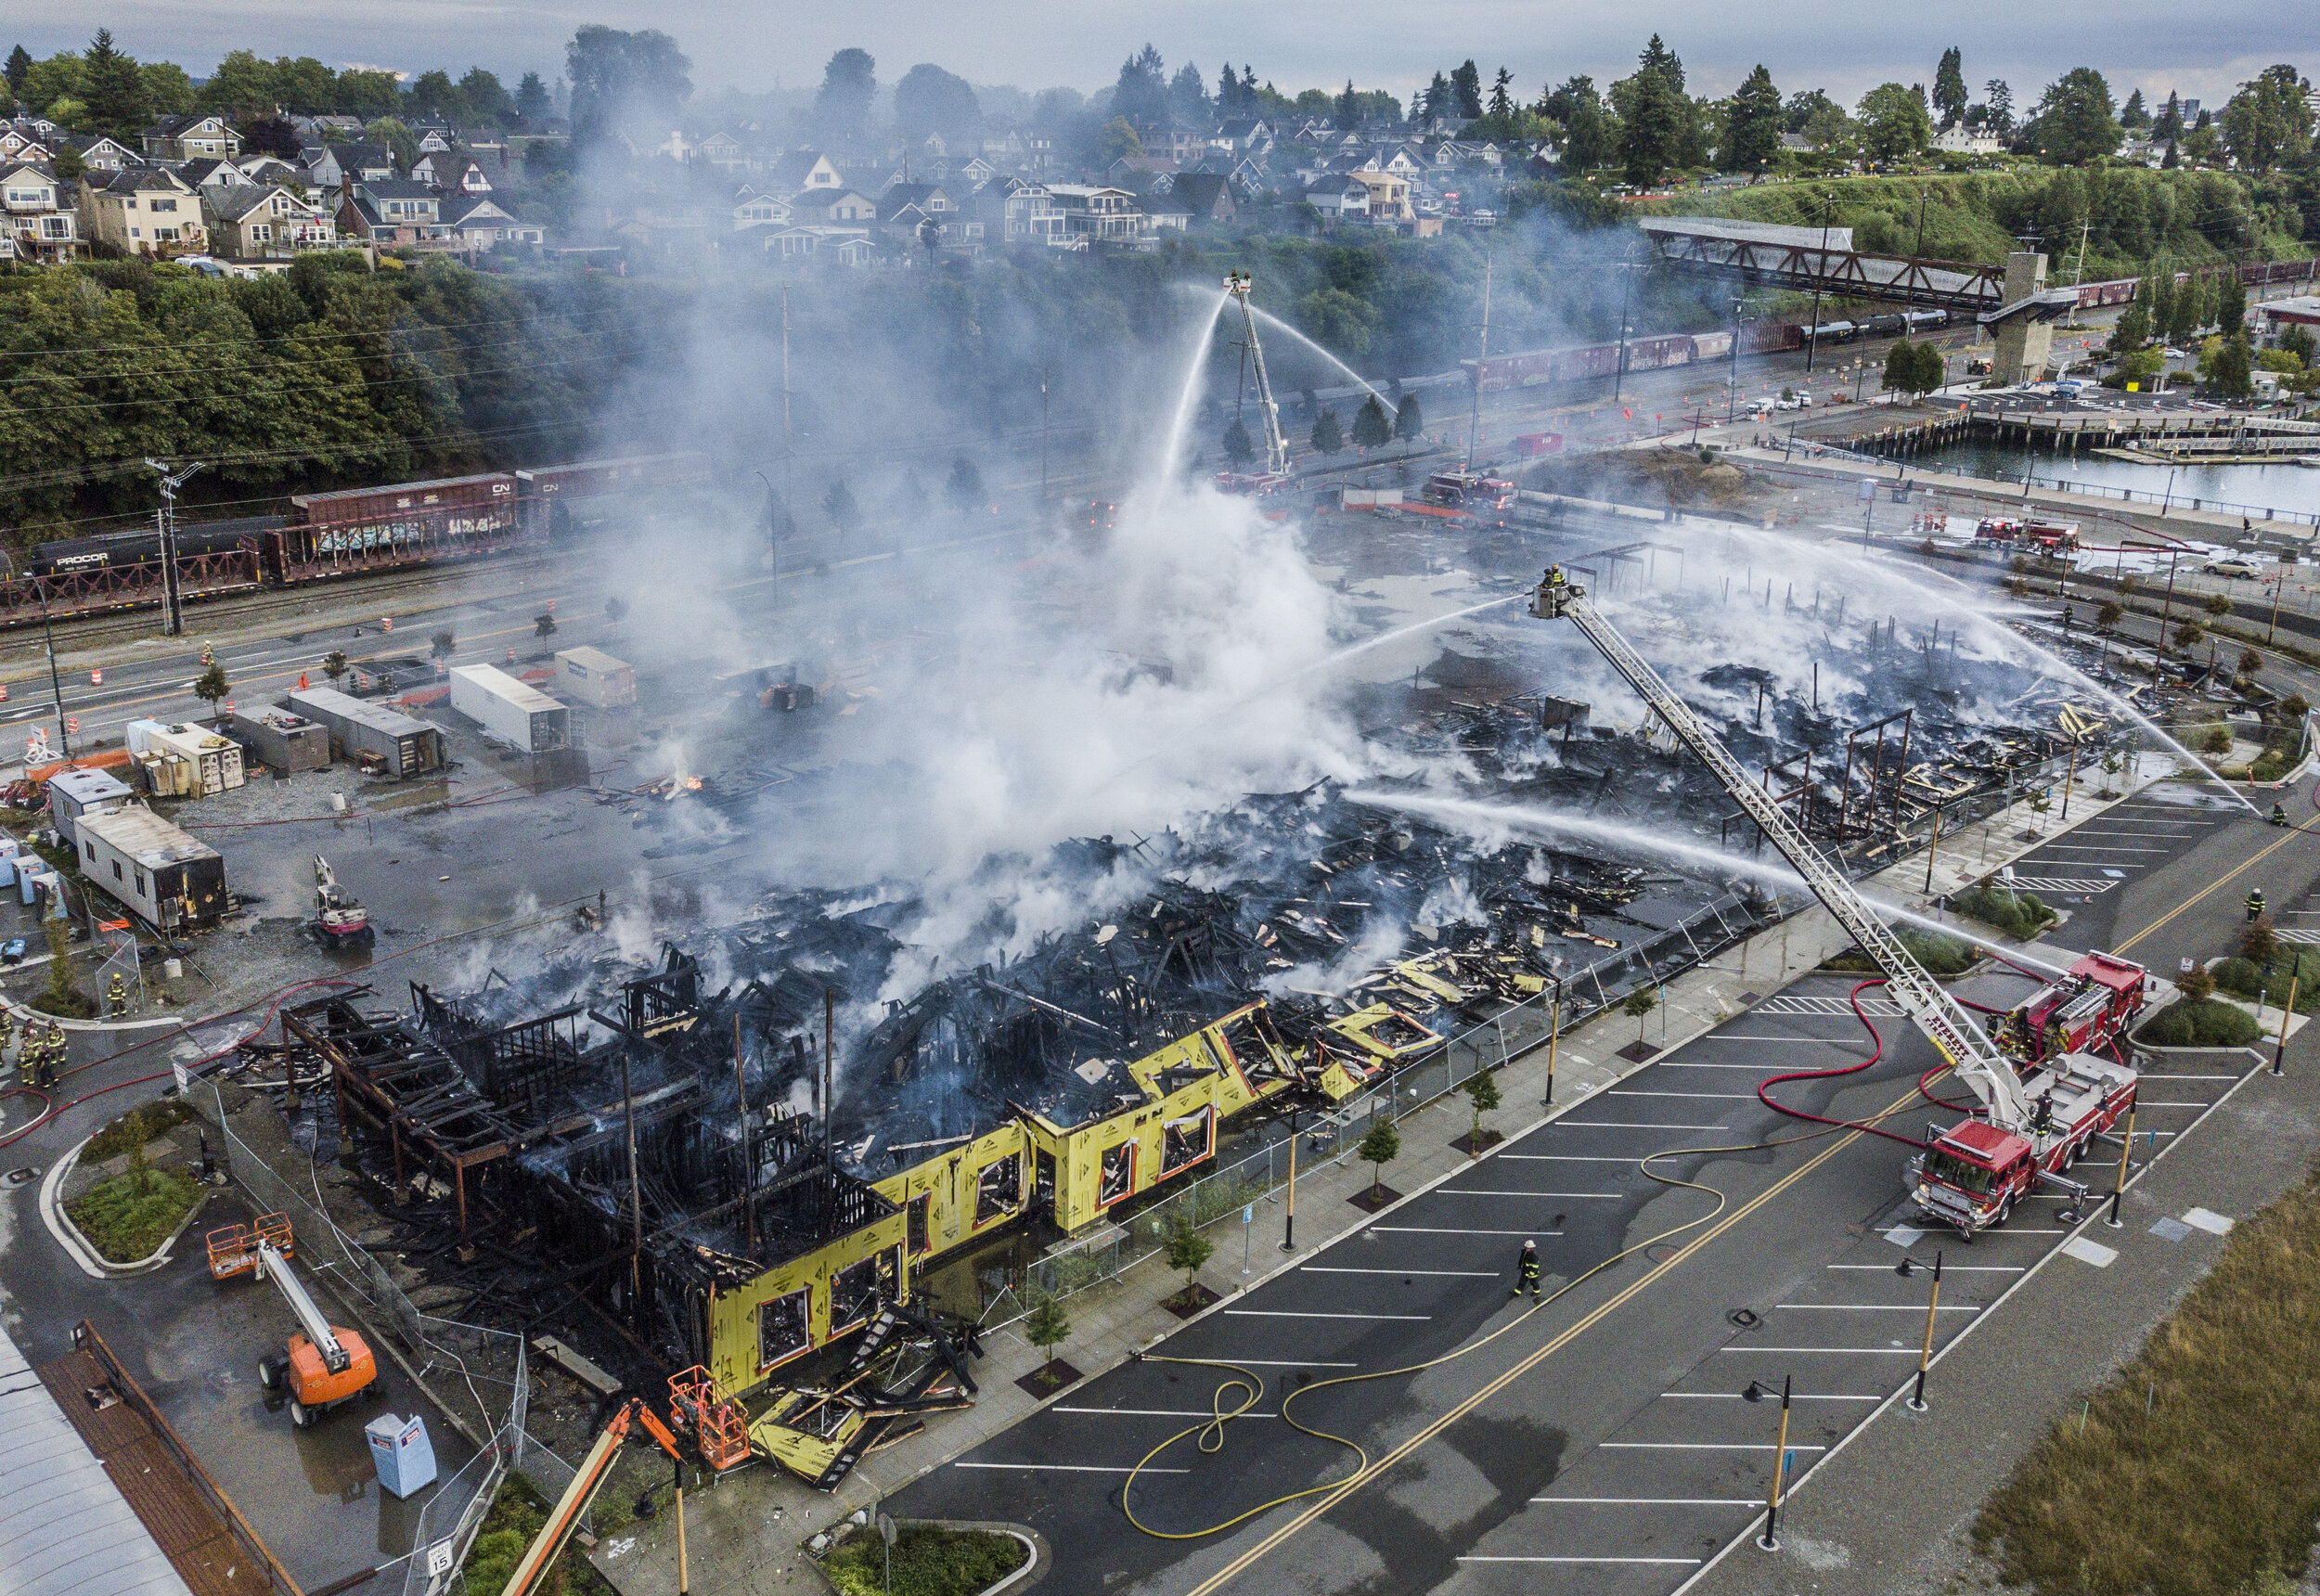  On Friday, July 17, a massive fire destroyed the south portion of the Waterfront Apartments that were under construction at the Port of Everett. Authorities sifted through the rubble and eventually determined the fire was not caused by criminal acti